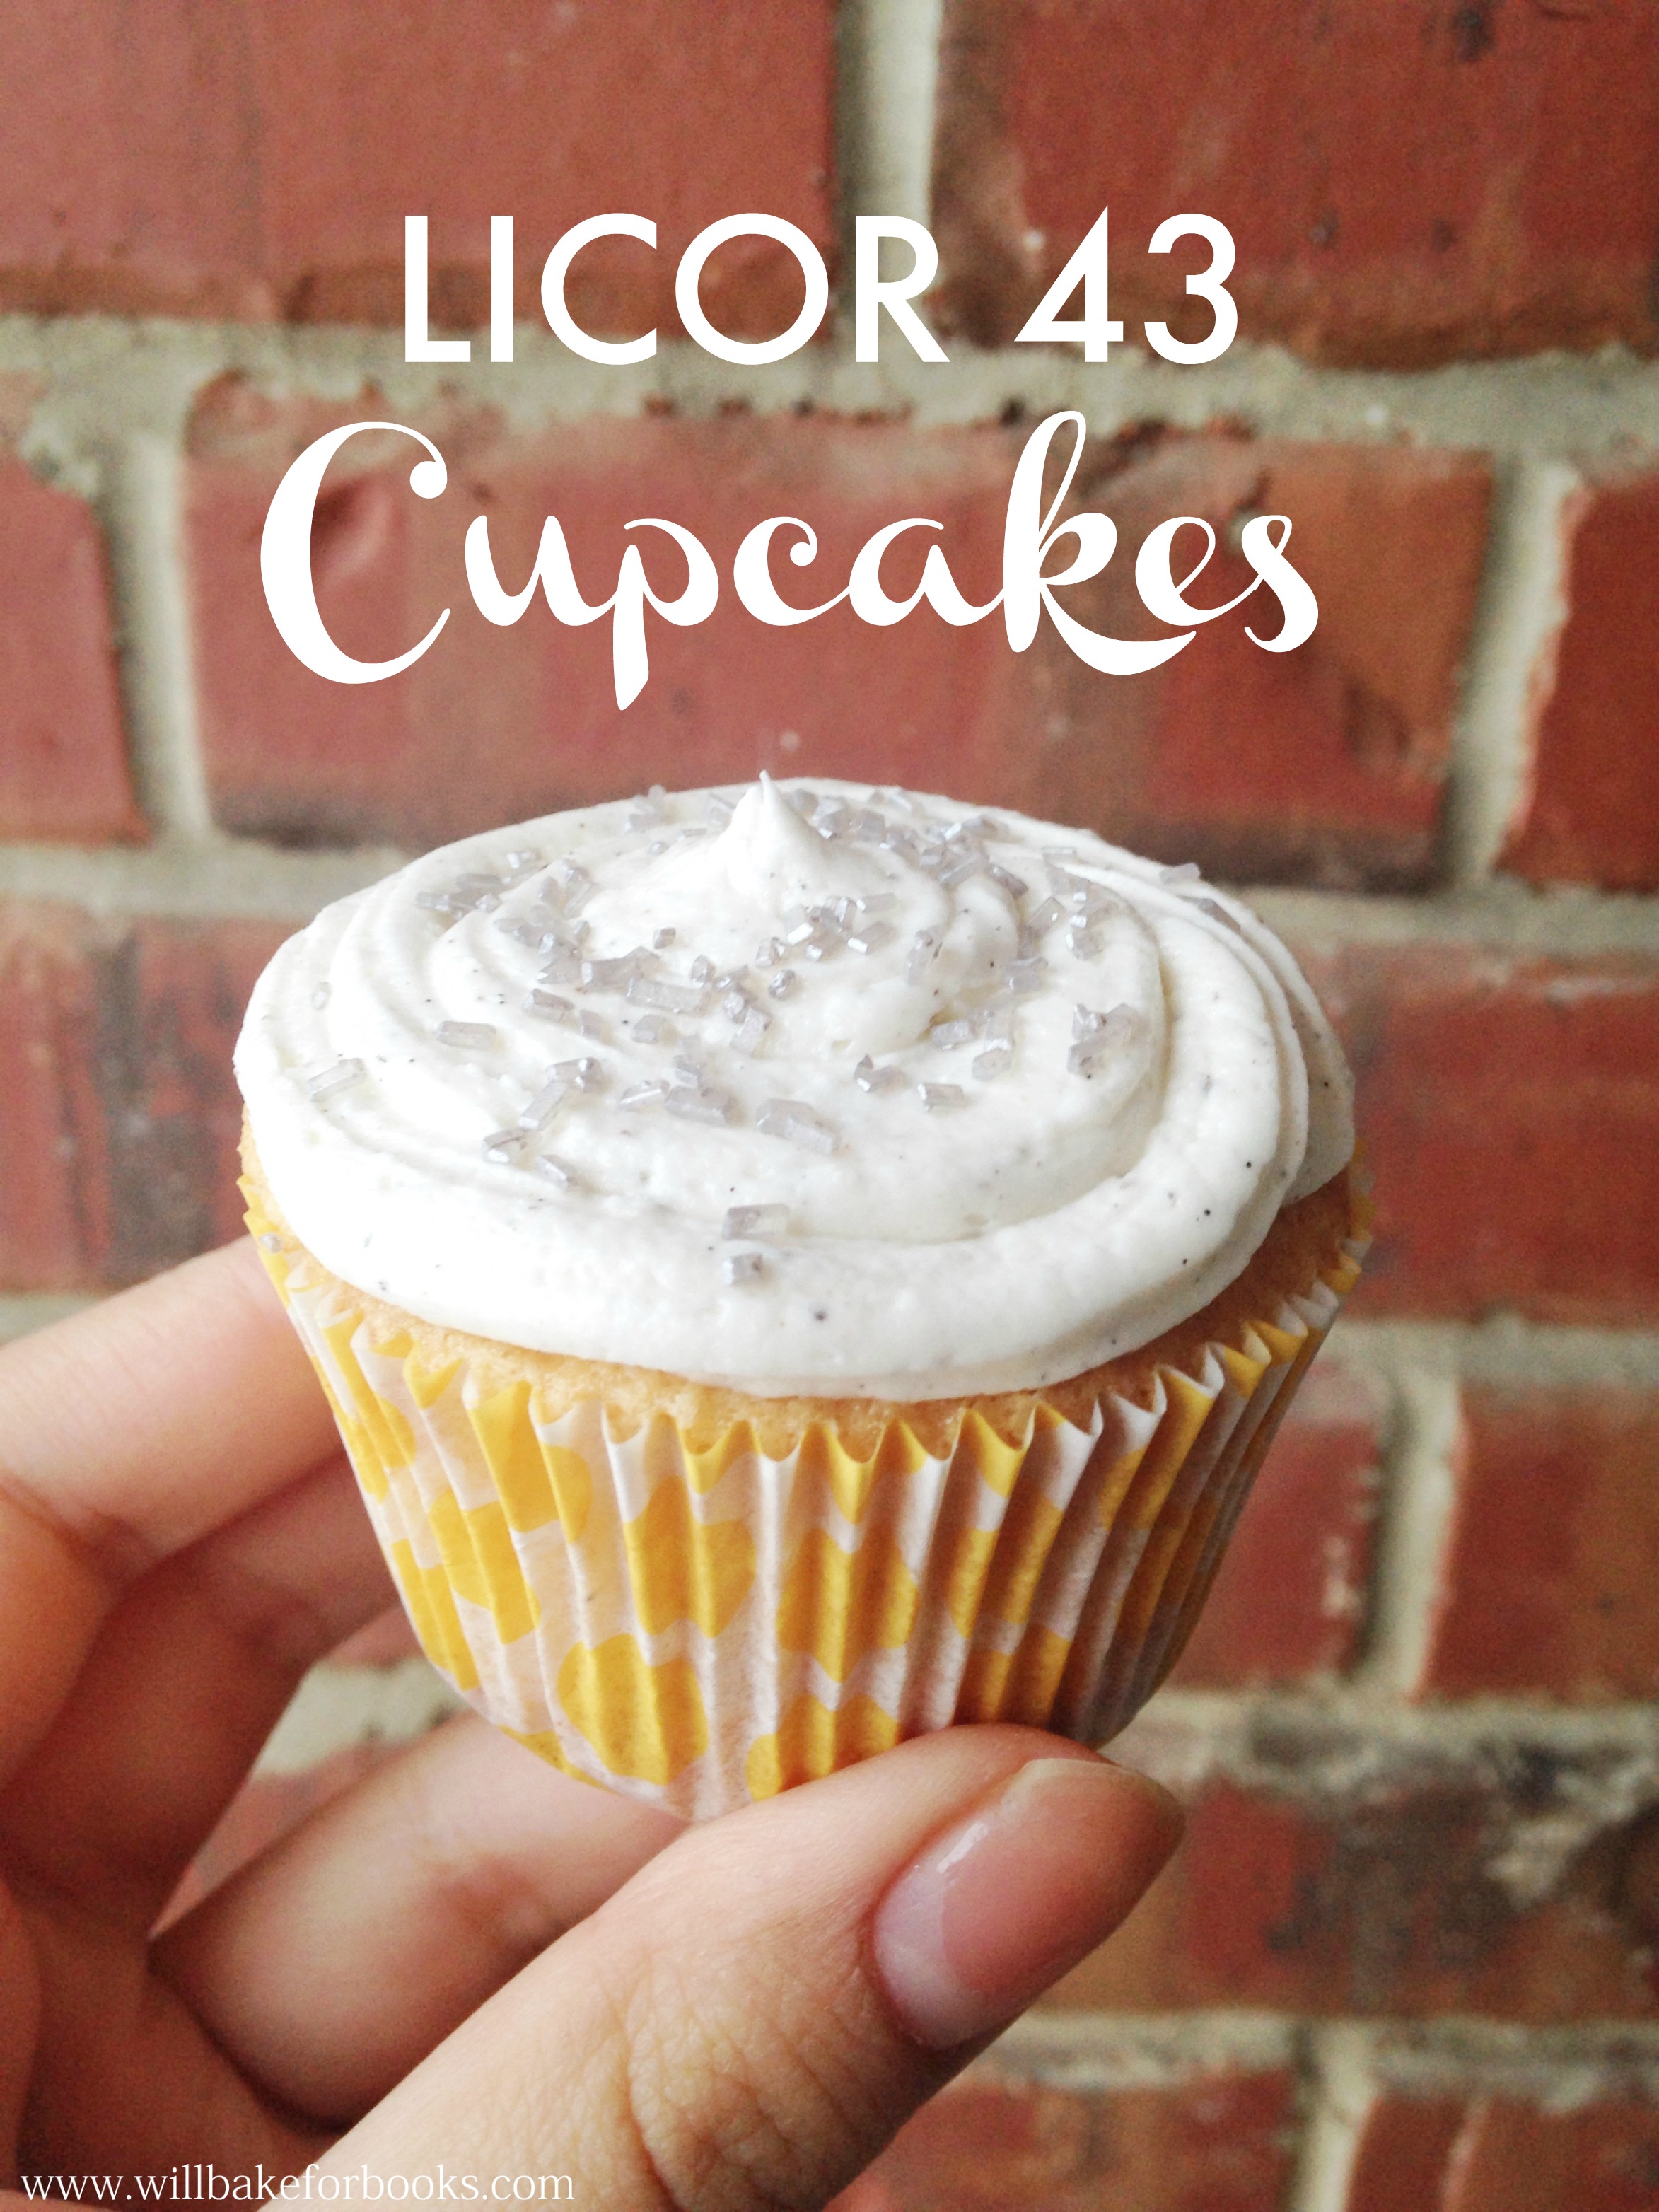 Licor 43 Cupcakes | Vanilla cupcakes brushed with a vanilla and citrus liquor and frosting! Found on willbakeforbooks.com